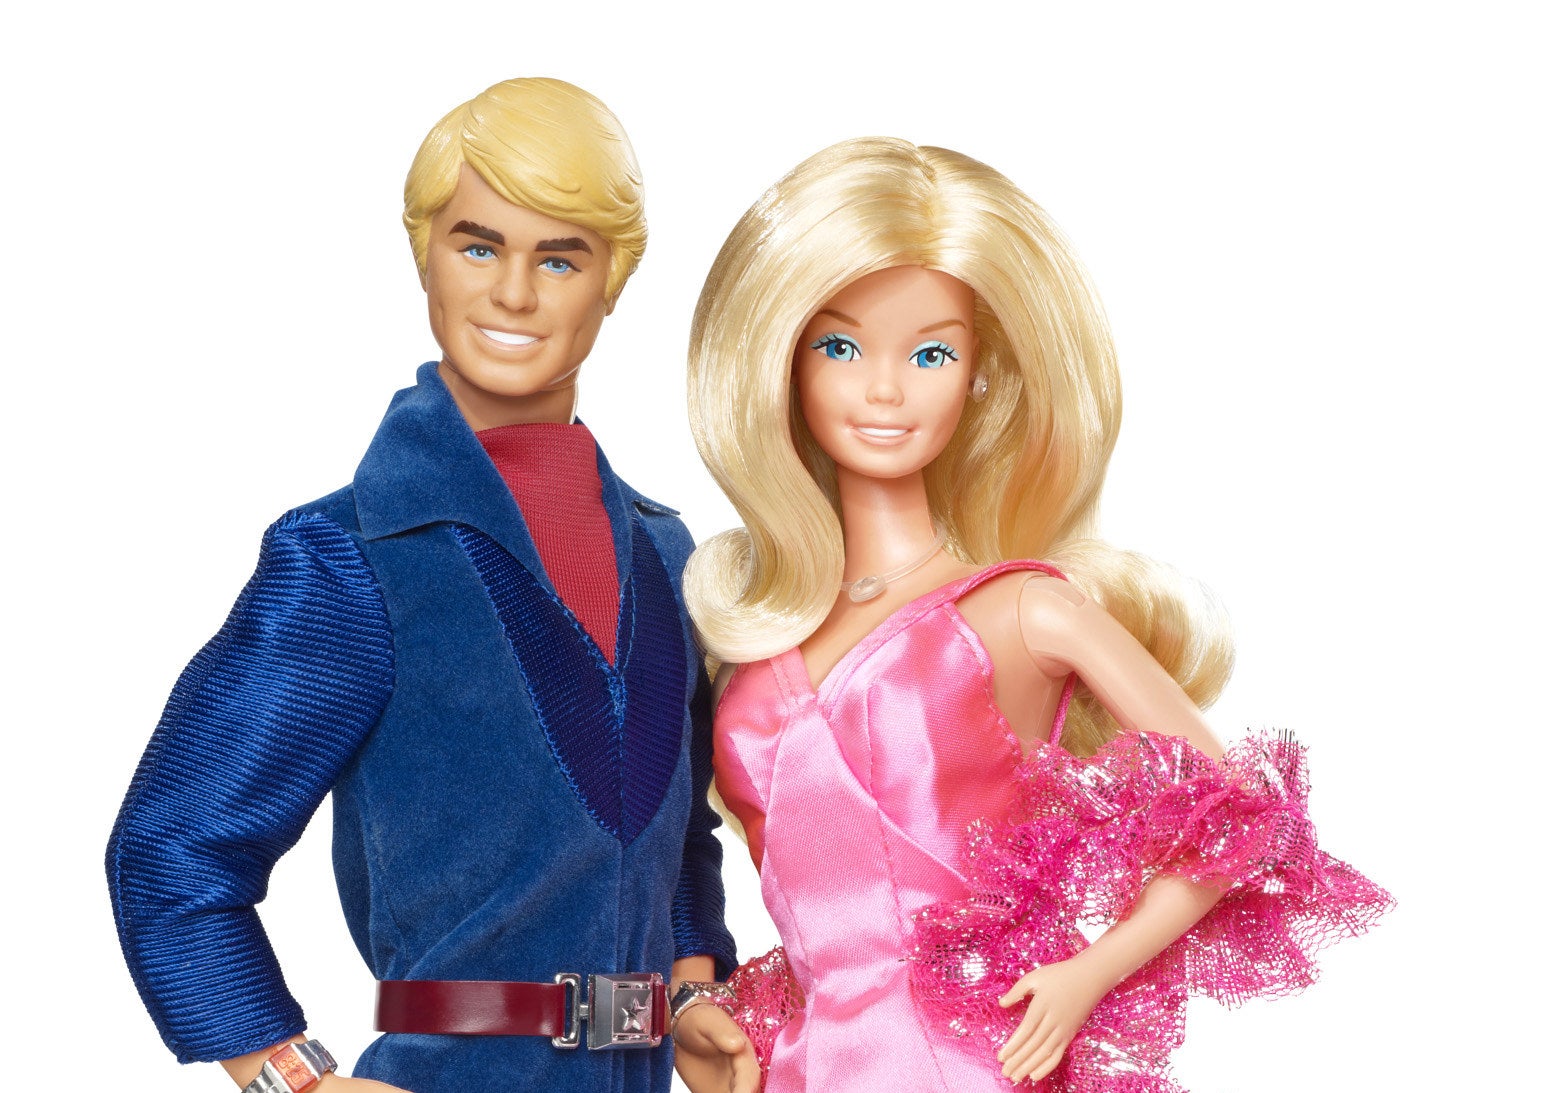 Ken in a blue velvet jumpsuit and Barbie in a pink dress with hot pink boa